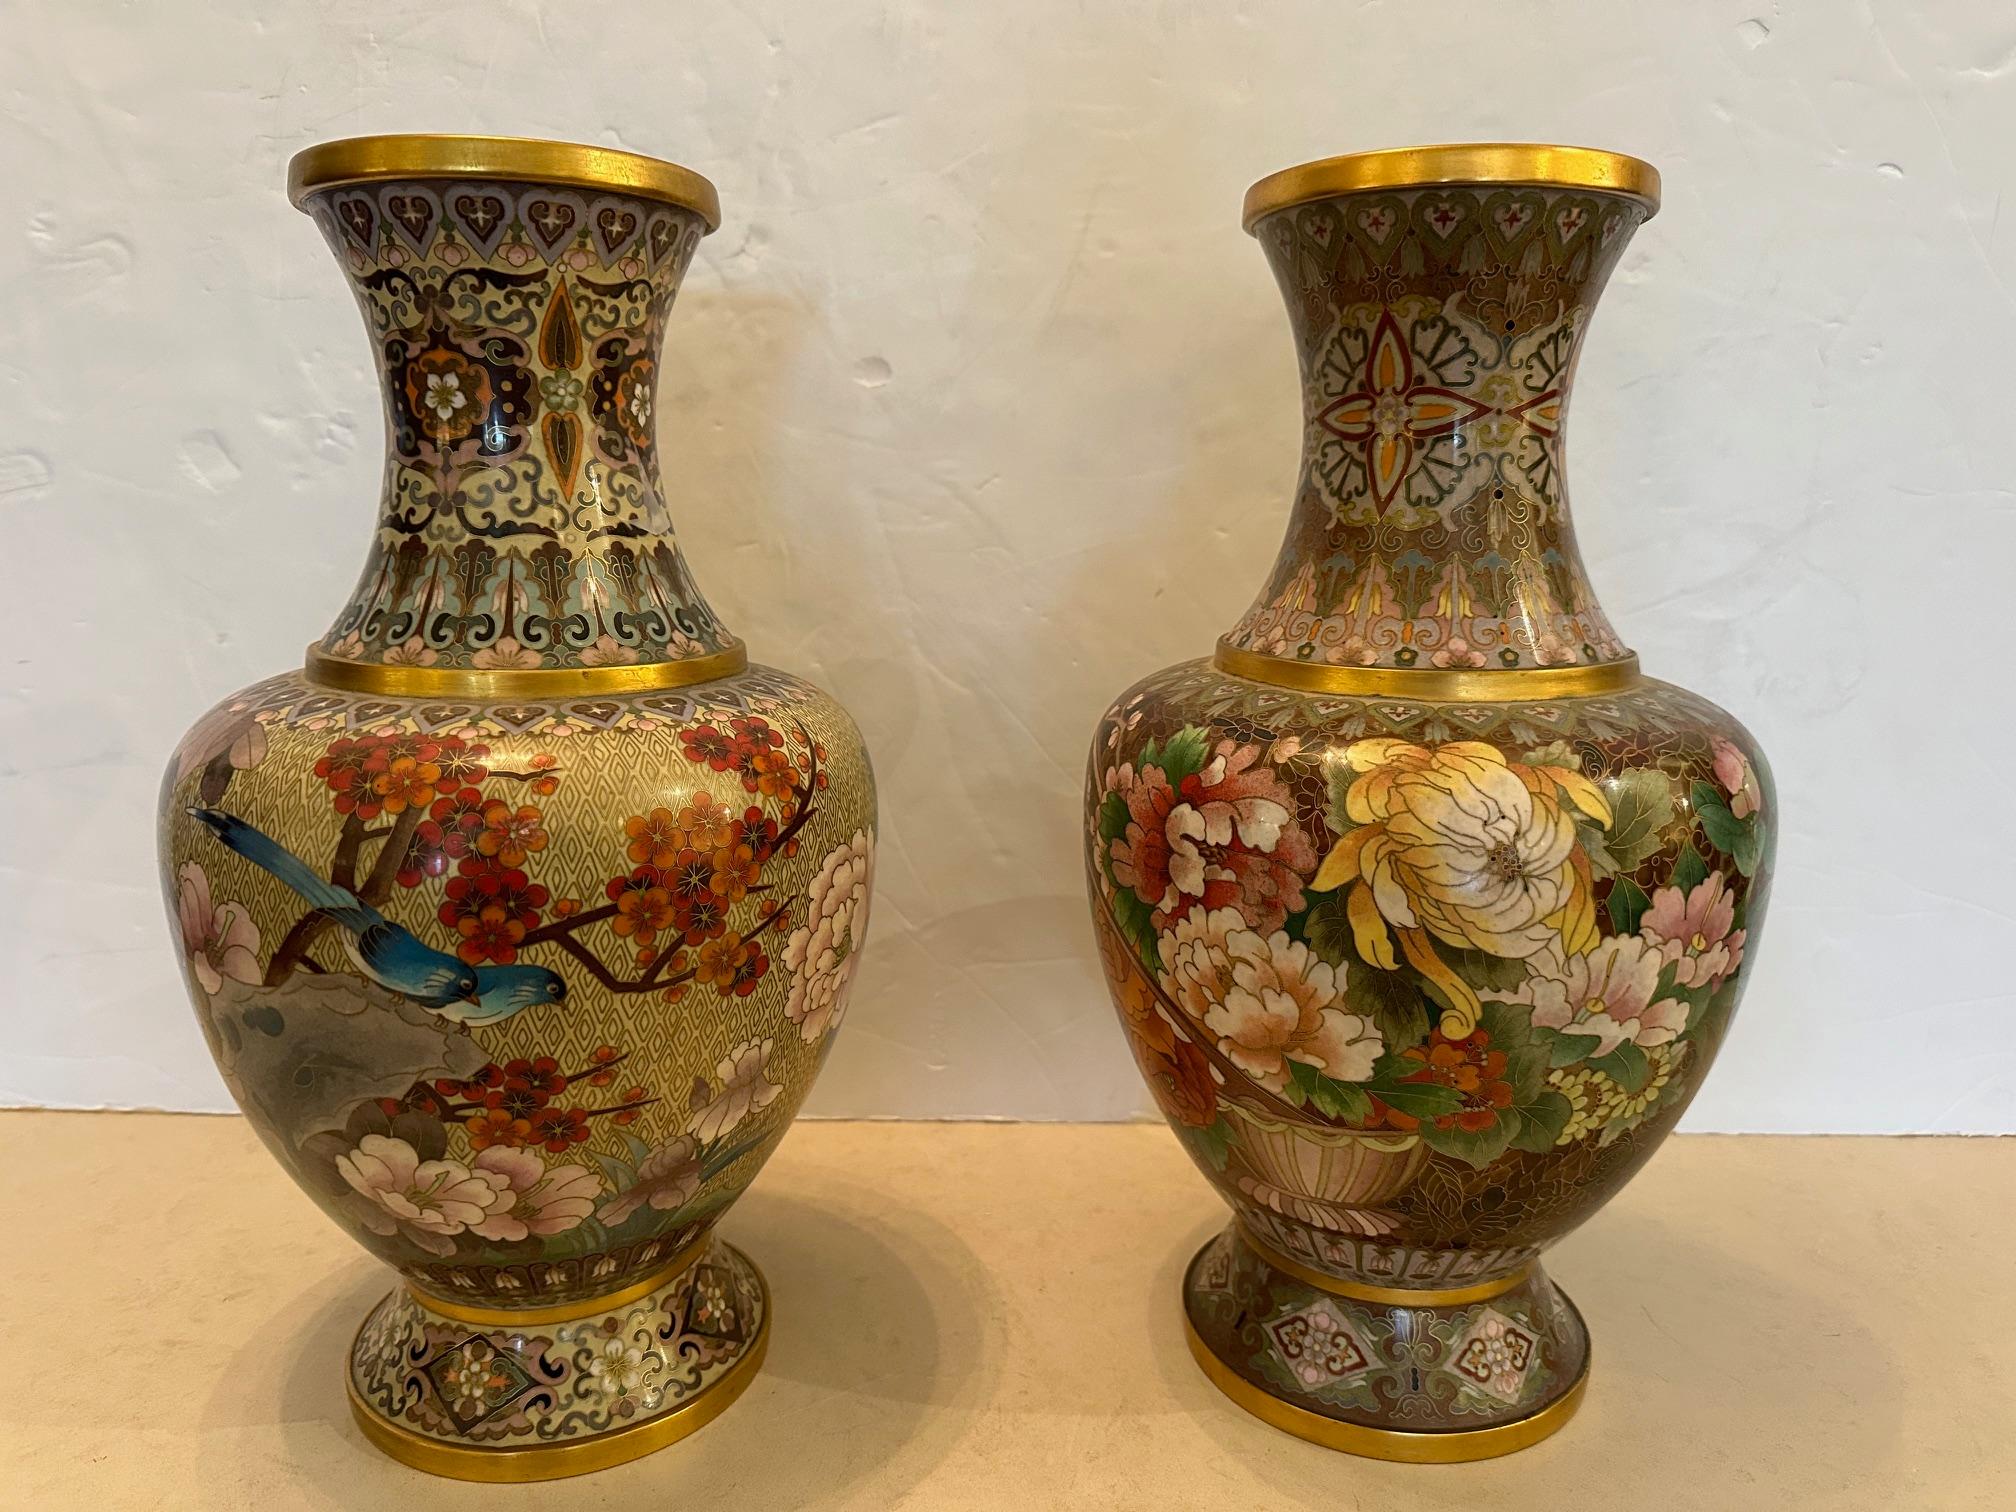 Pair of Exquisite Chinese Gilded Enamel on Bronze Cloissonne Vases For Sale